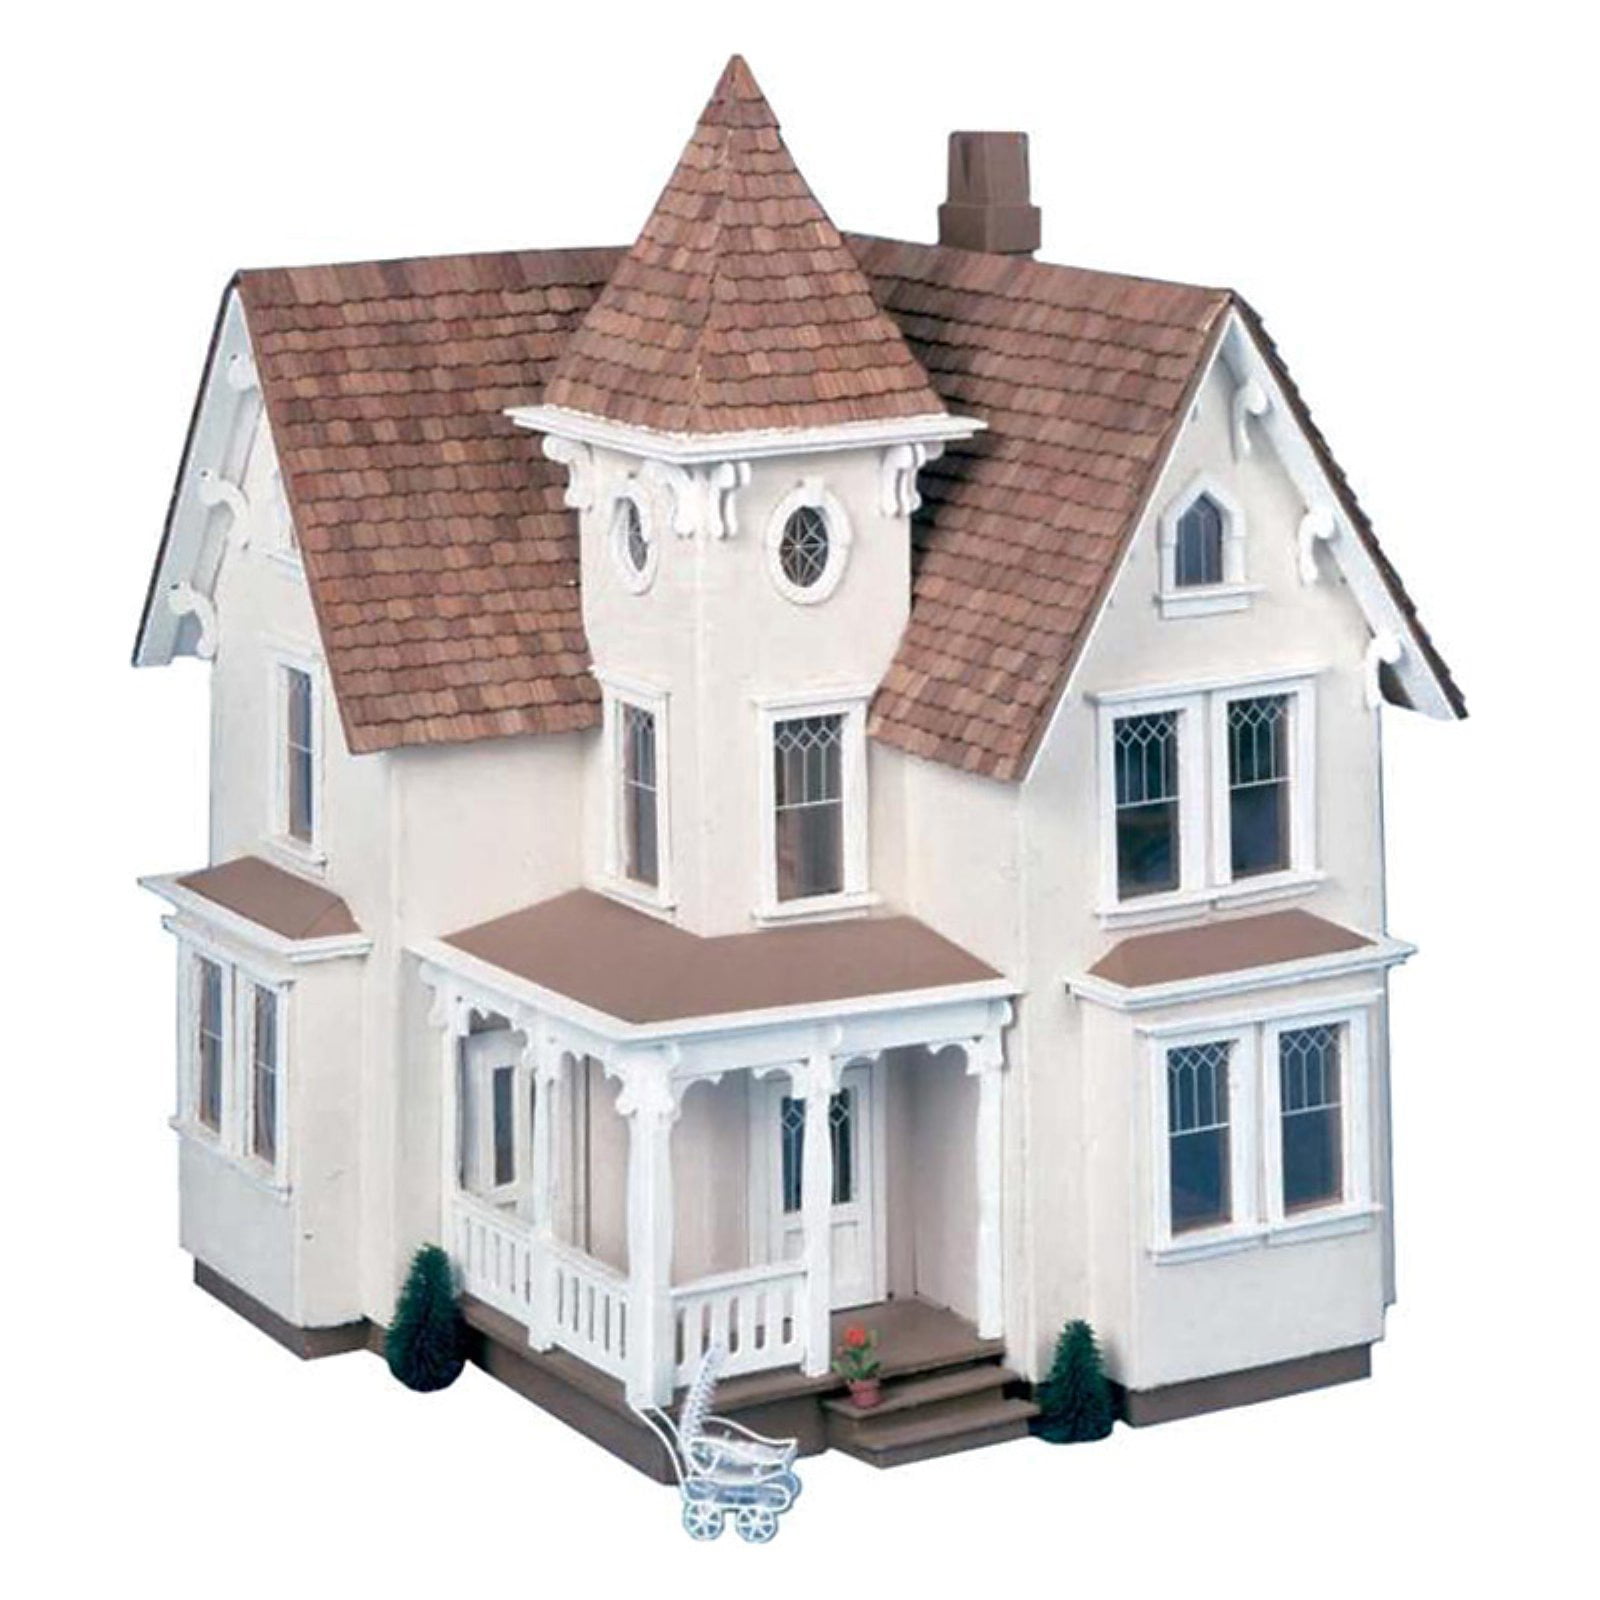 1 Inch Scale Greenleaf Willow Dollhouse Kit